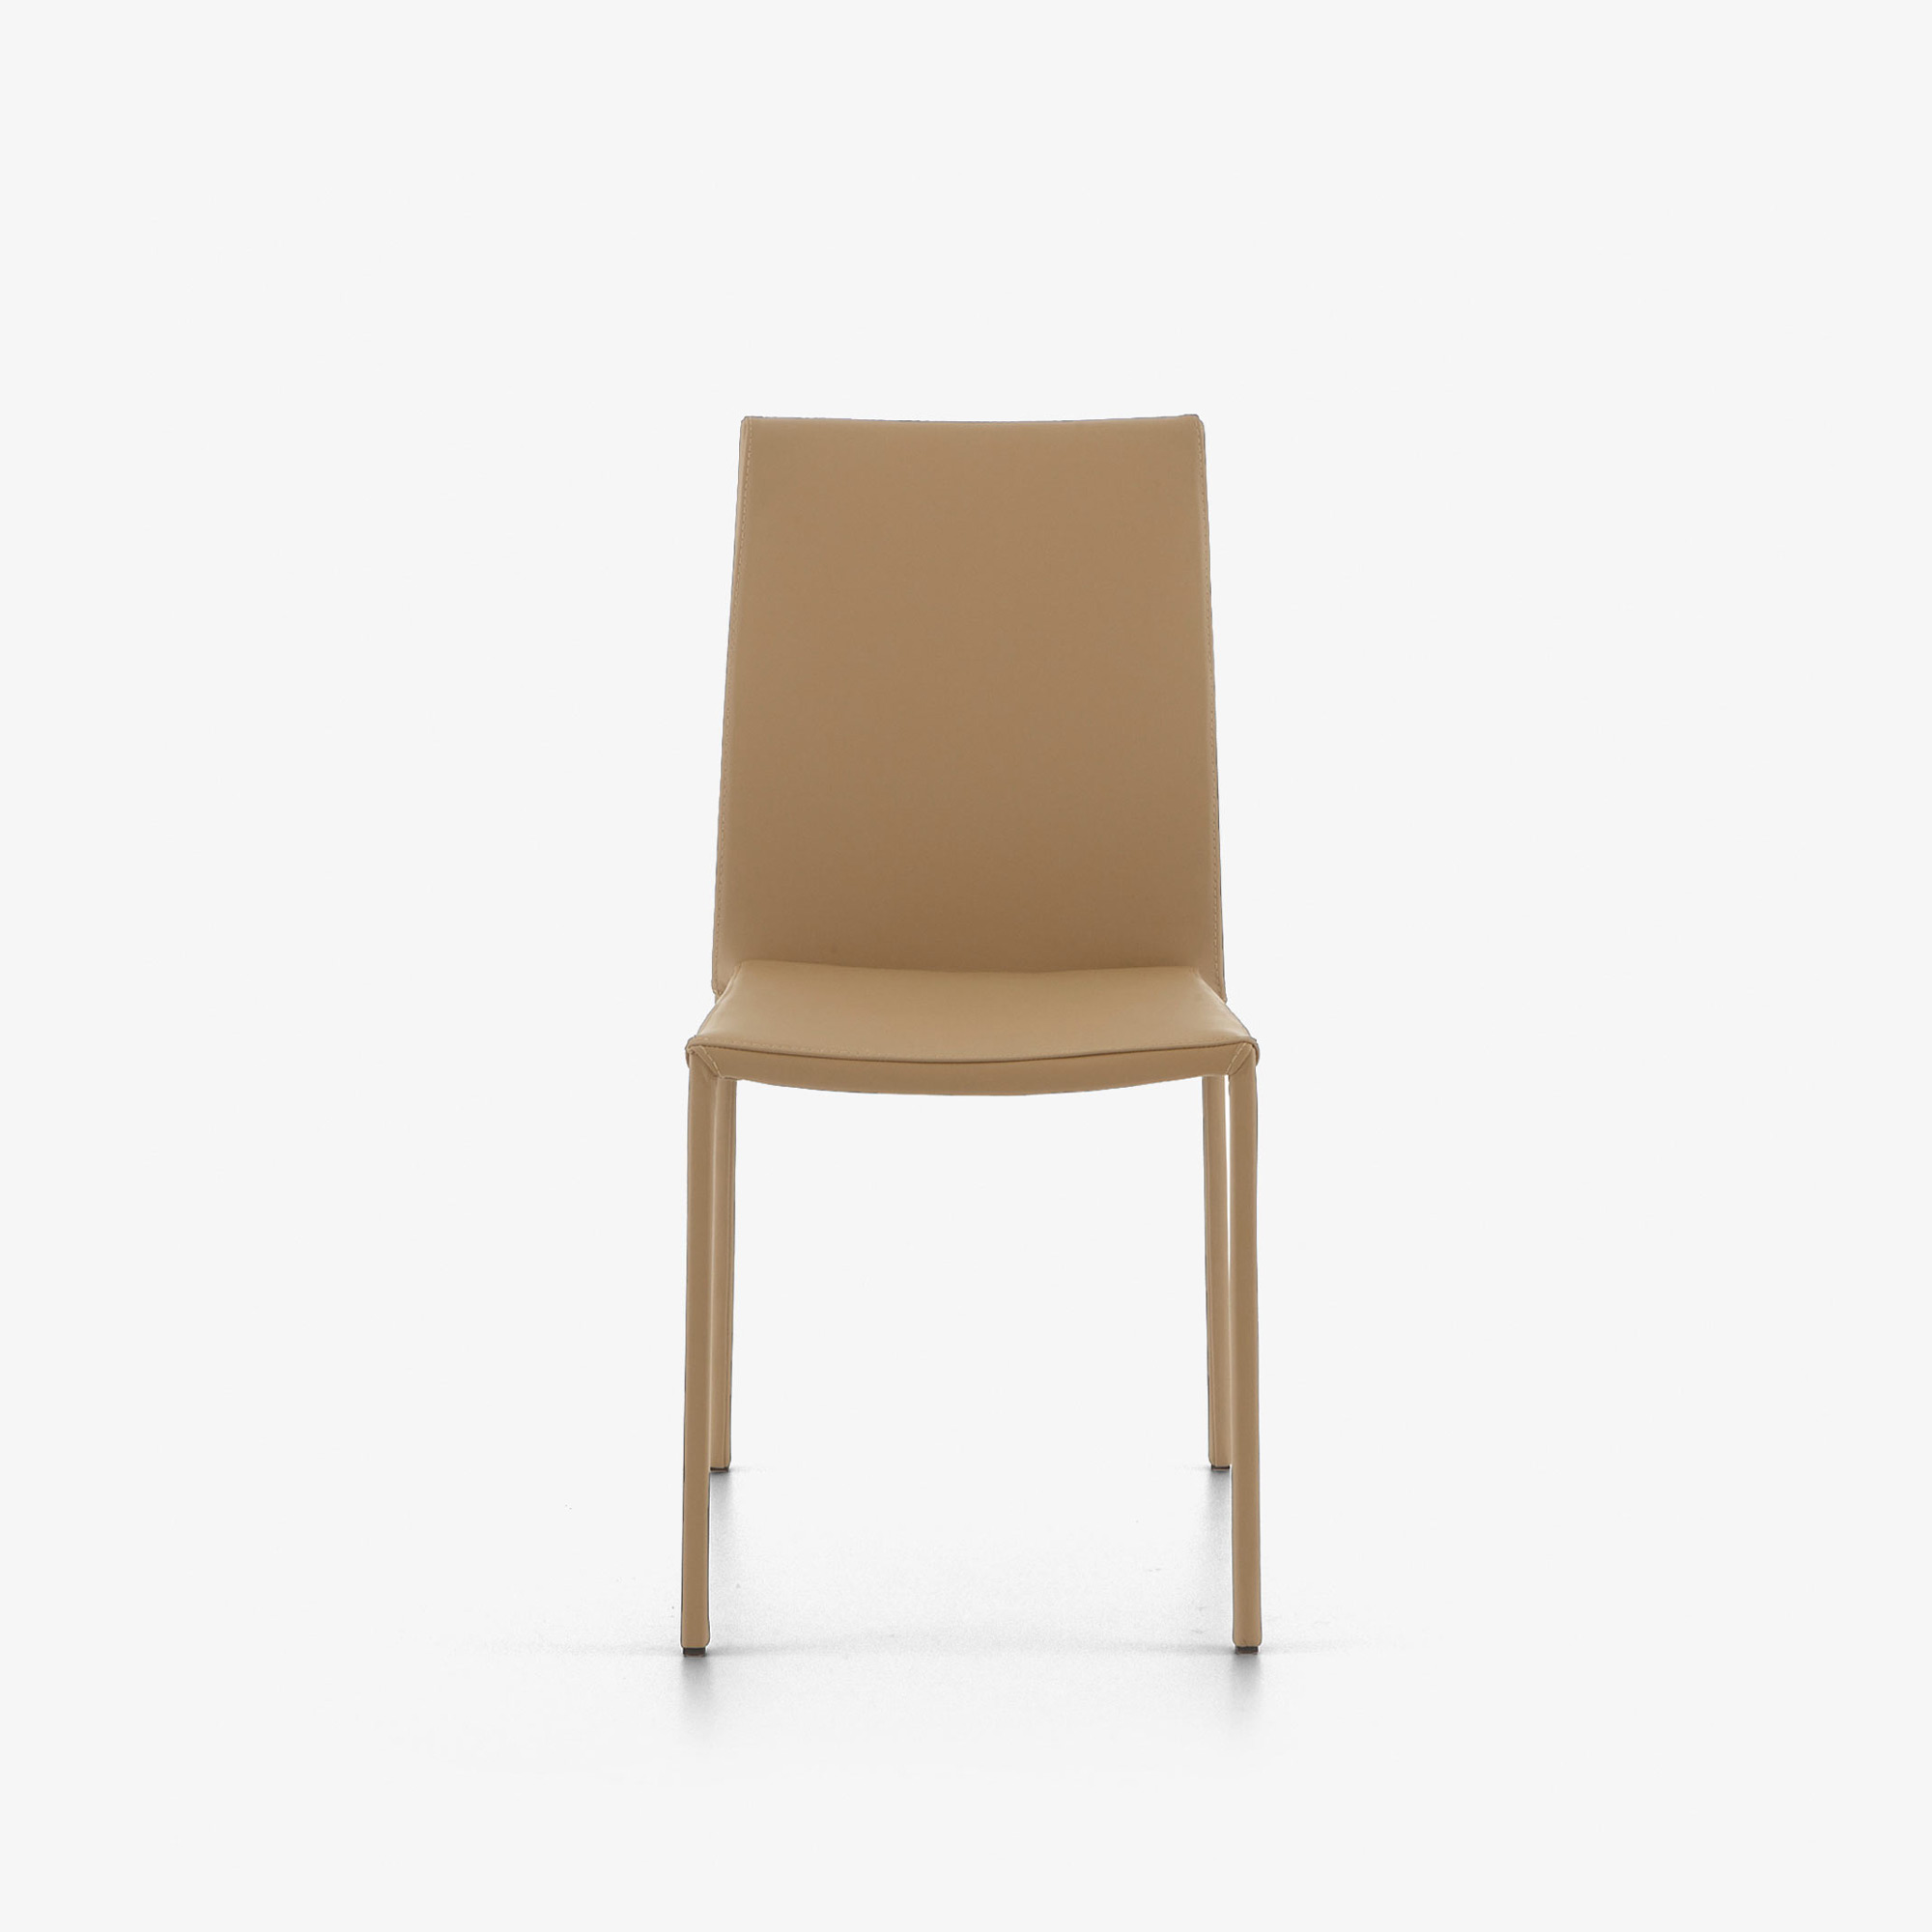 Image CHAIR BEIGE LEATHER 